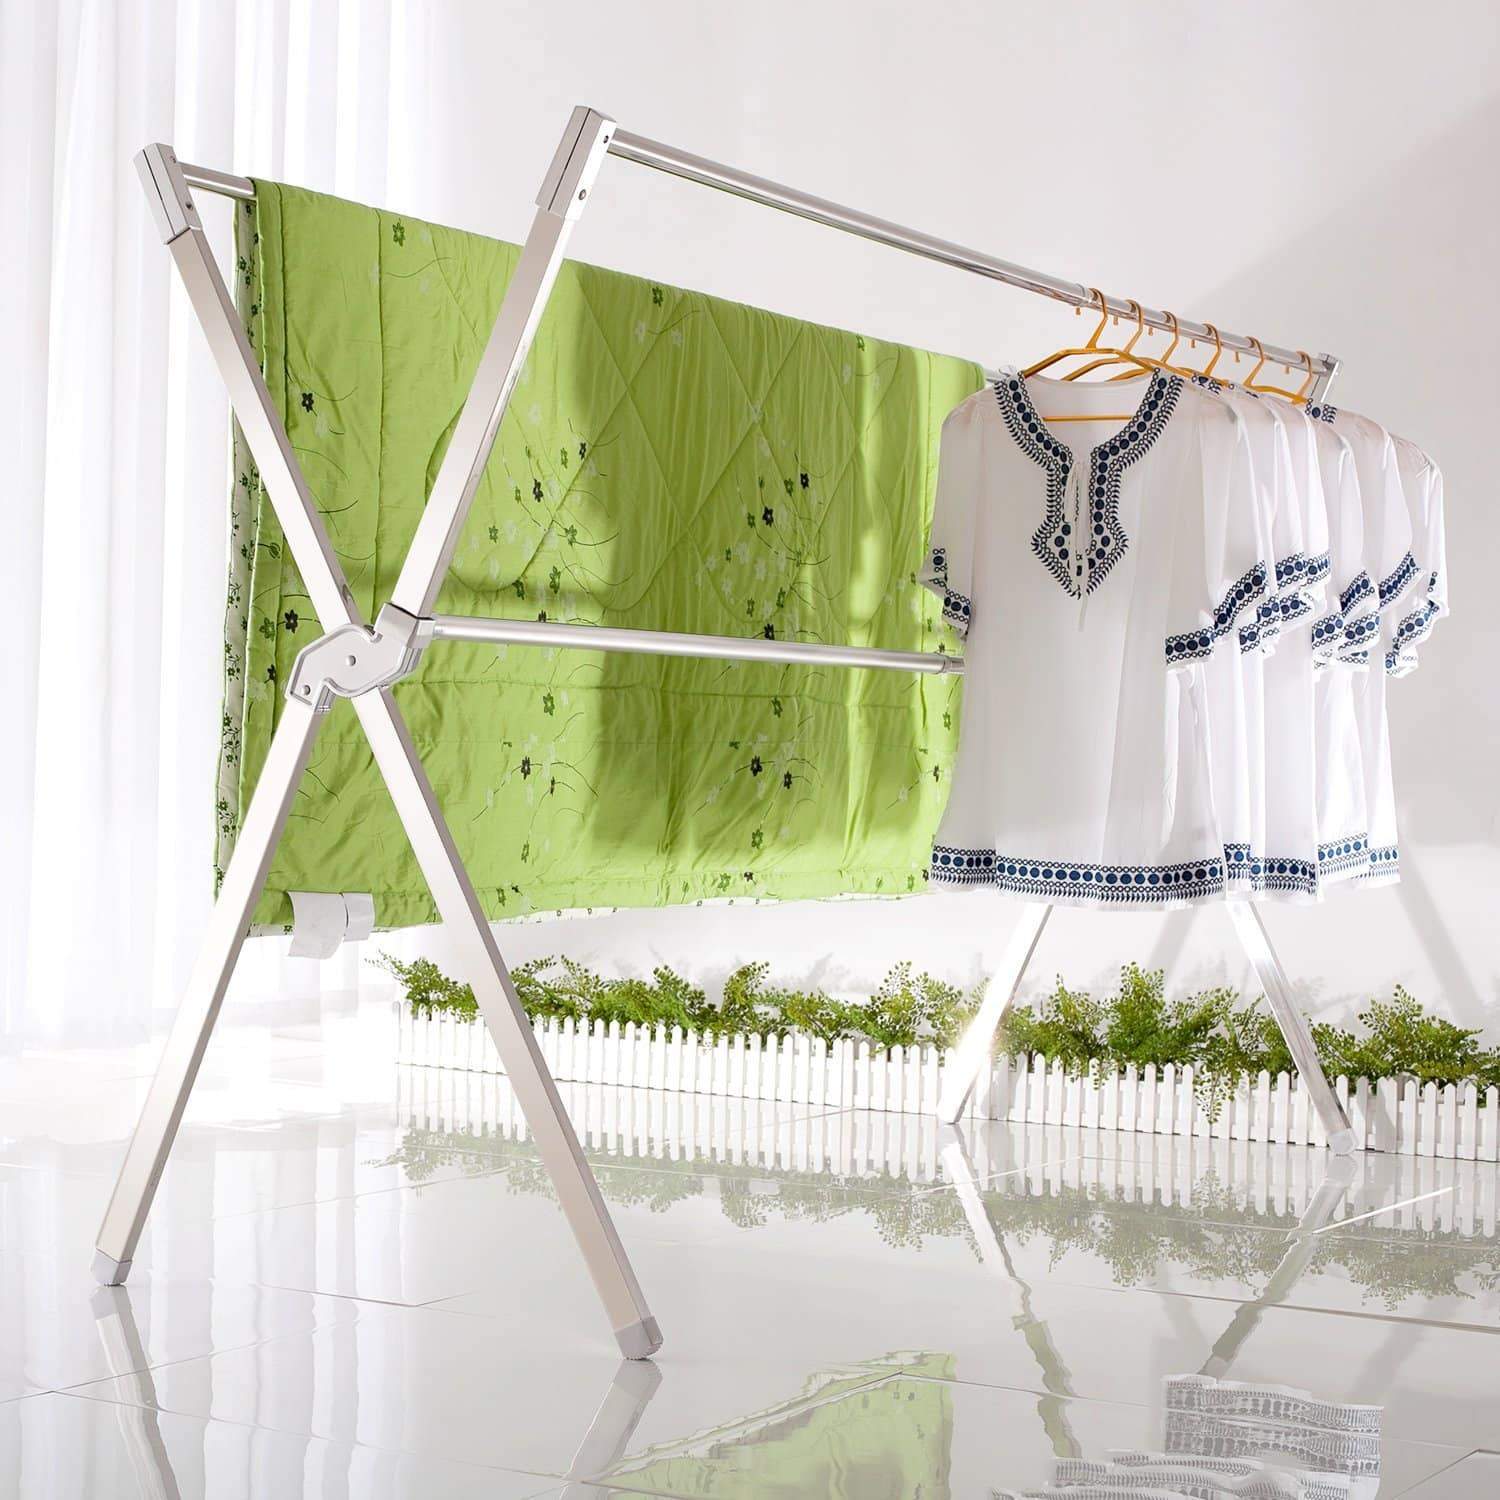 NON ROCK Stainless Steel Laundry Drying Rack Free Installed,Expandable,oldable Space Saving,55-95 Inch,Heavy Duty